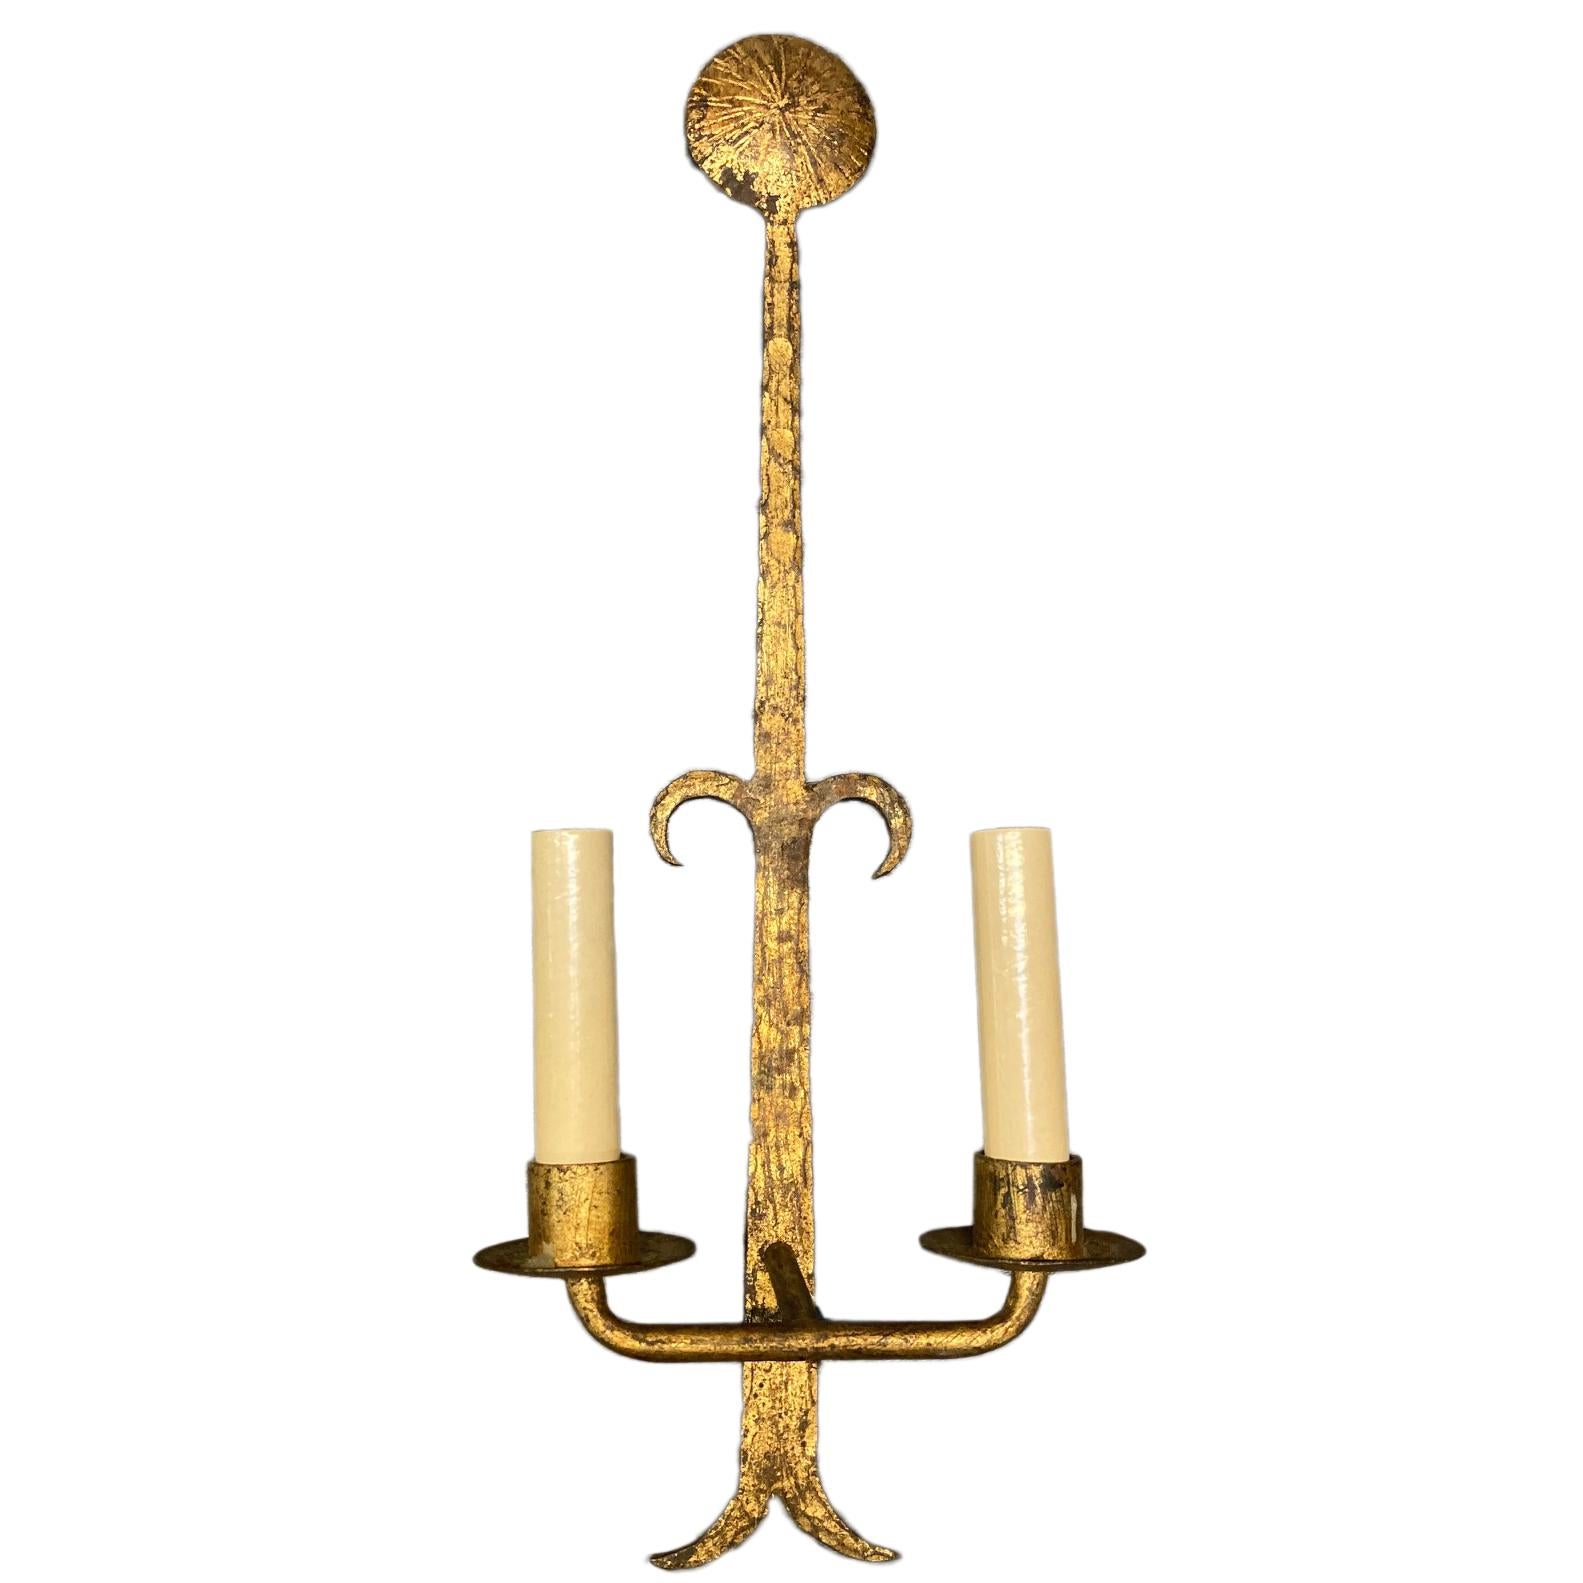 A pair of circa 1950s hammered and gilt iron two-light sconces with an original gilt finish.

Measurements:
Height 22